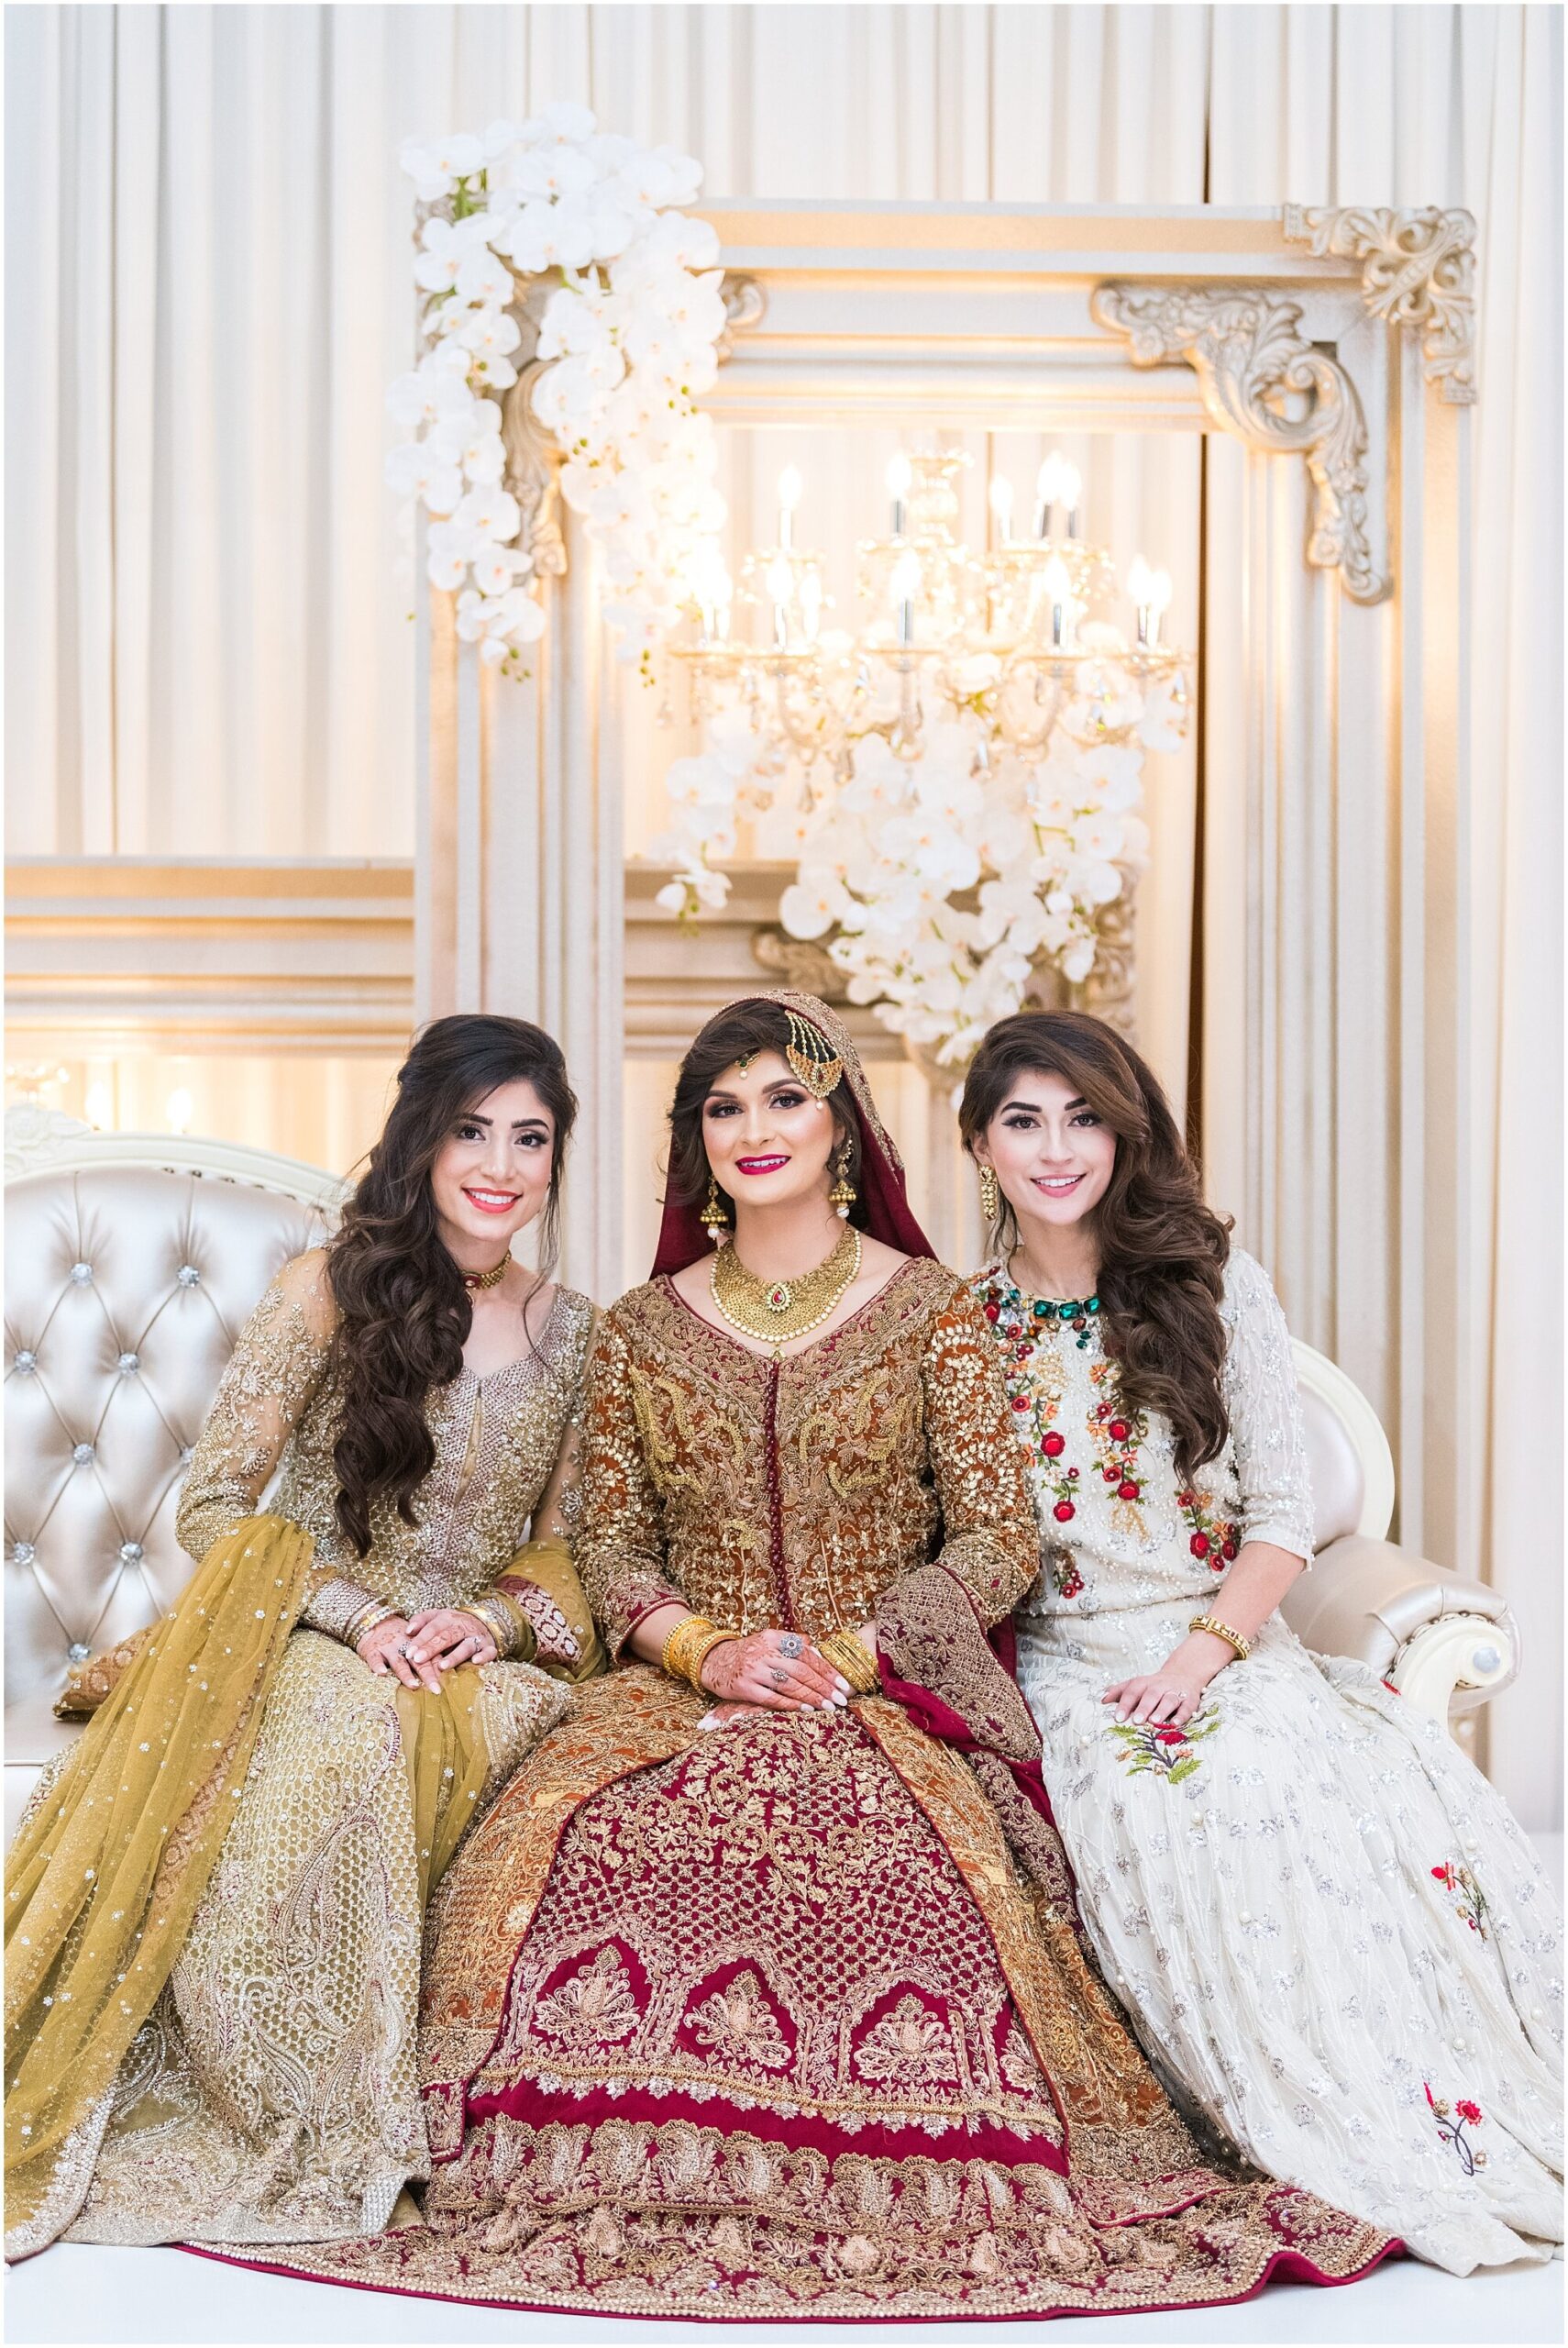 Louisville Pakistani bride posing with her friends at her wedding reception.